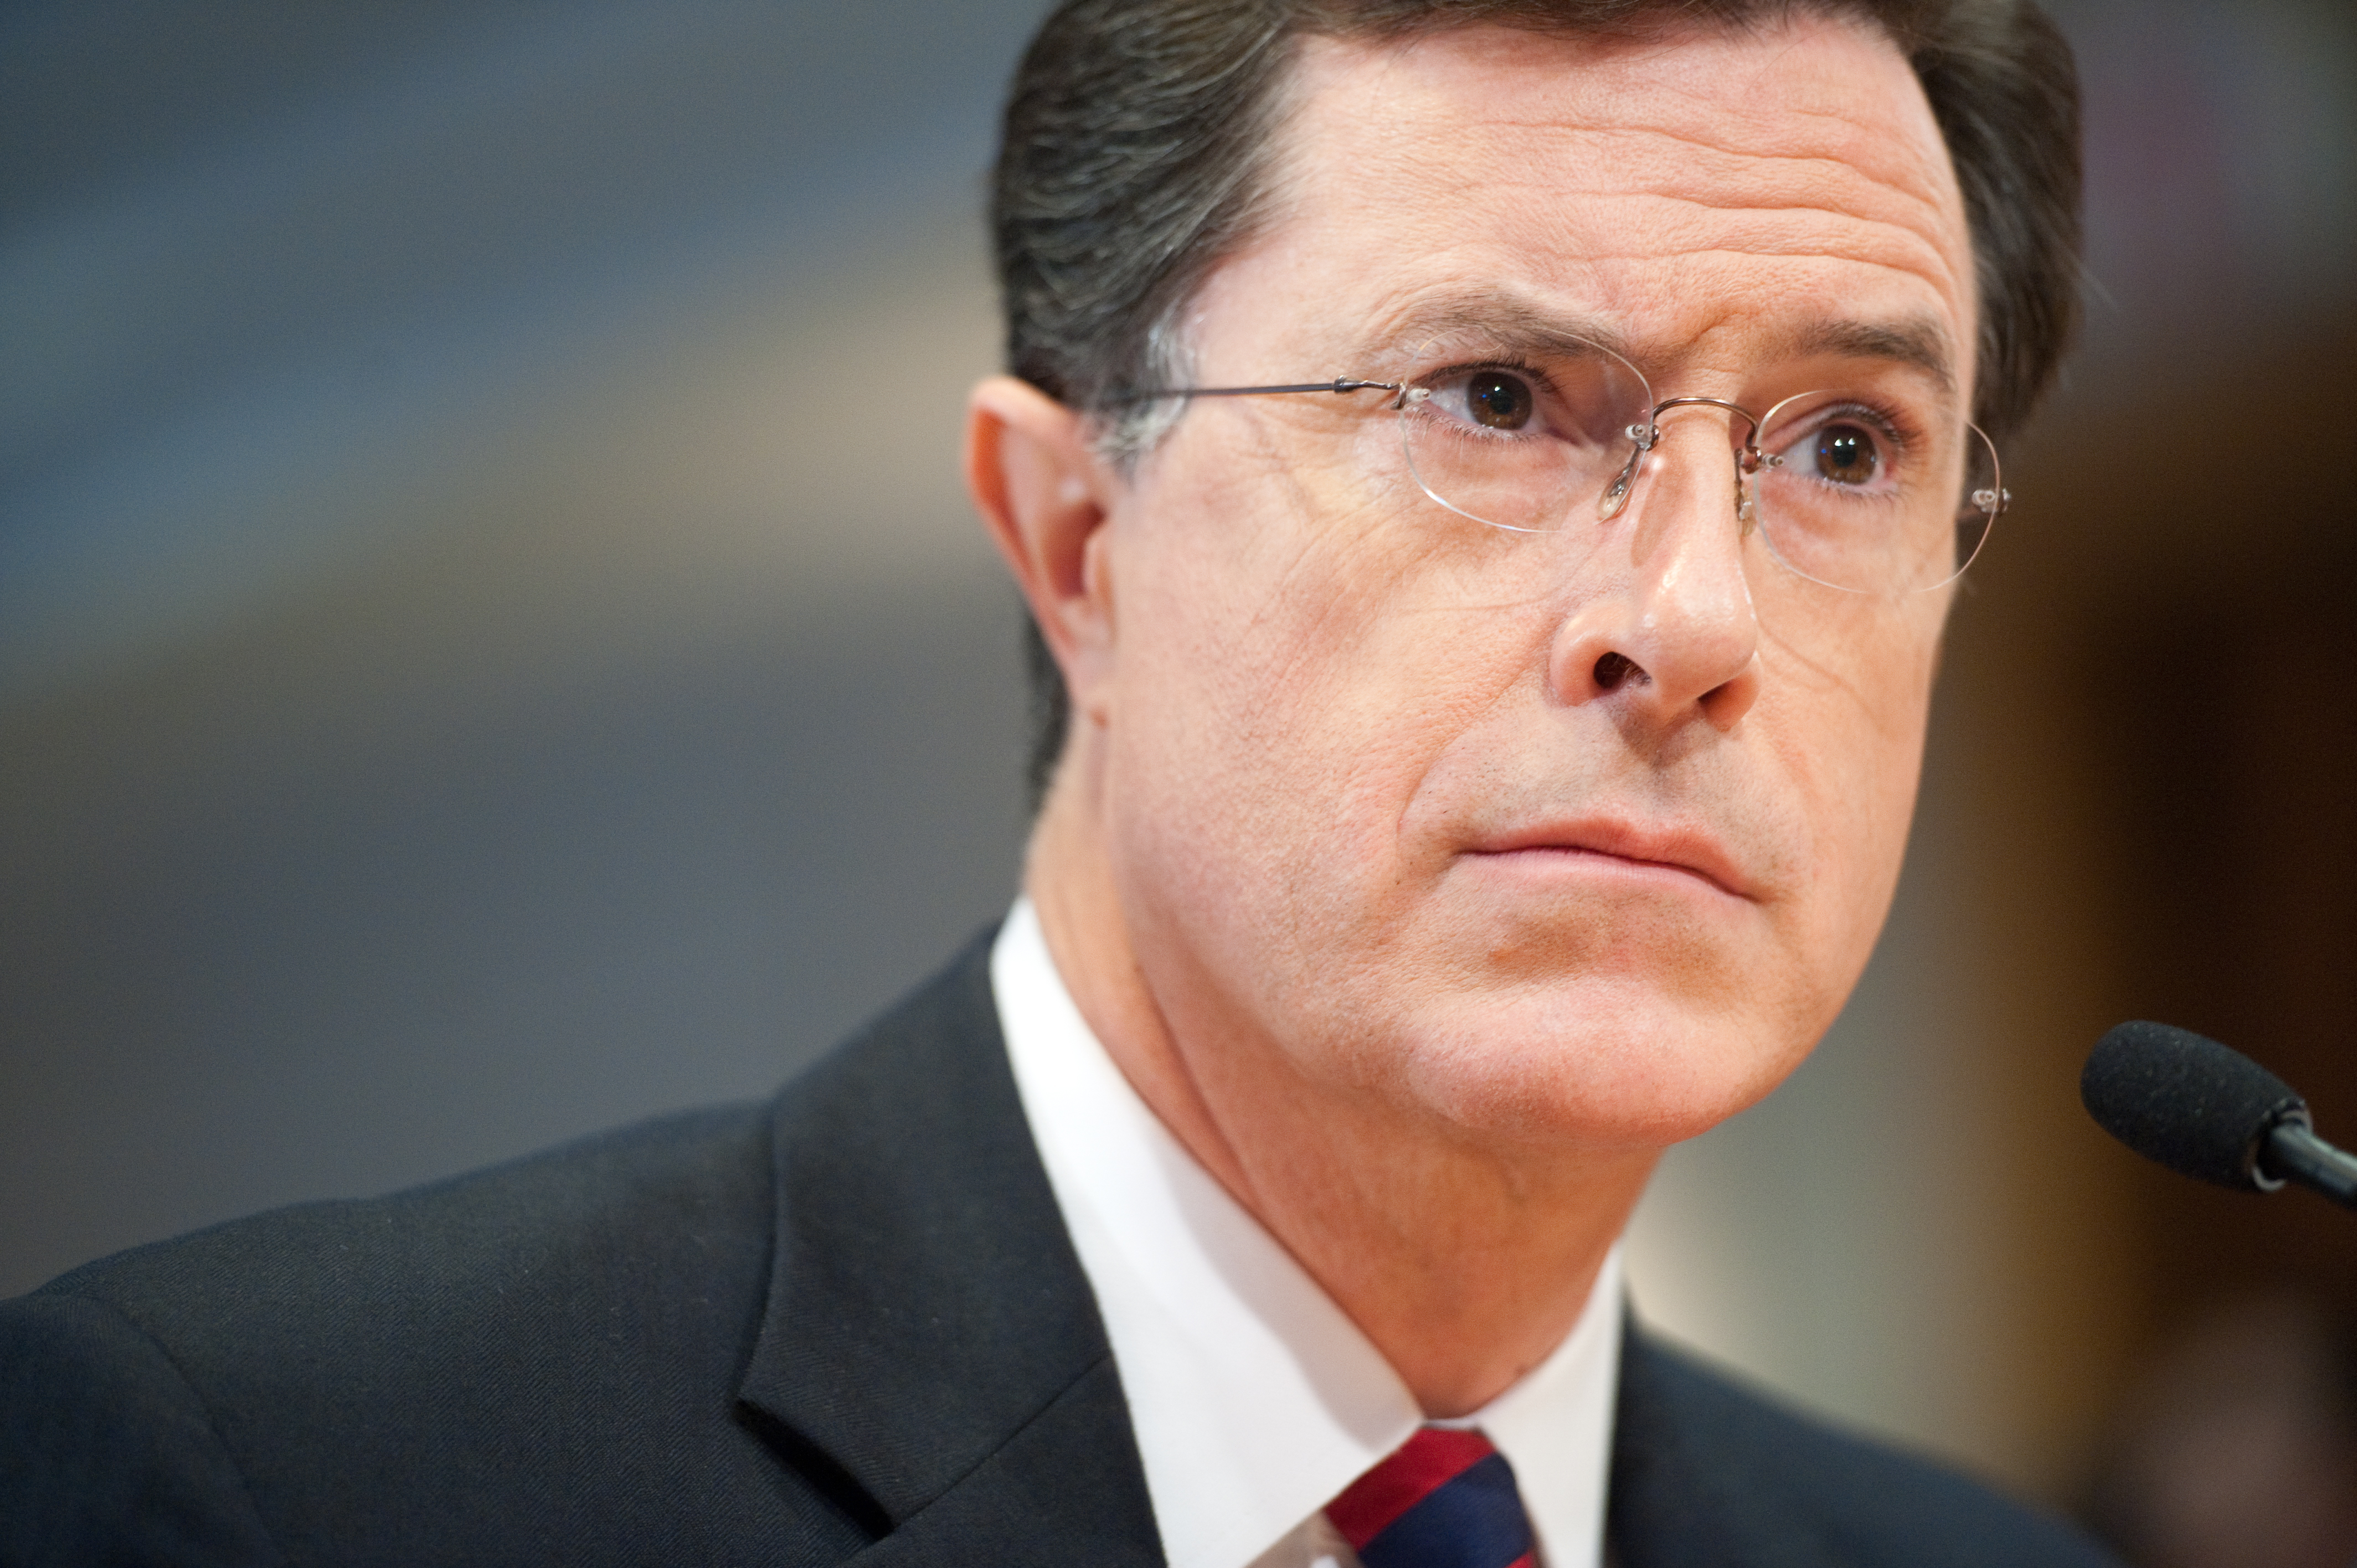 Stephen Colbert listens to a commissioner as he appears at a hearing at the Federal Election Commission in Washington, D.C. to discuss his request to form a Political Action Committee on June 30, 2011. (Sarah L. Voisin—The Washington Post/Getty Images)